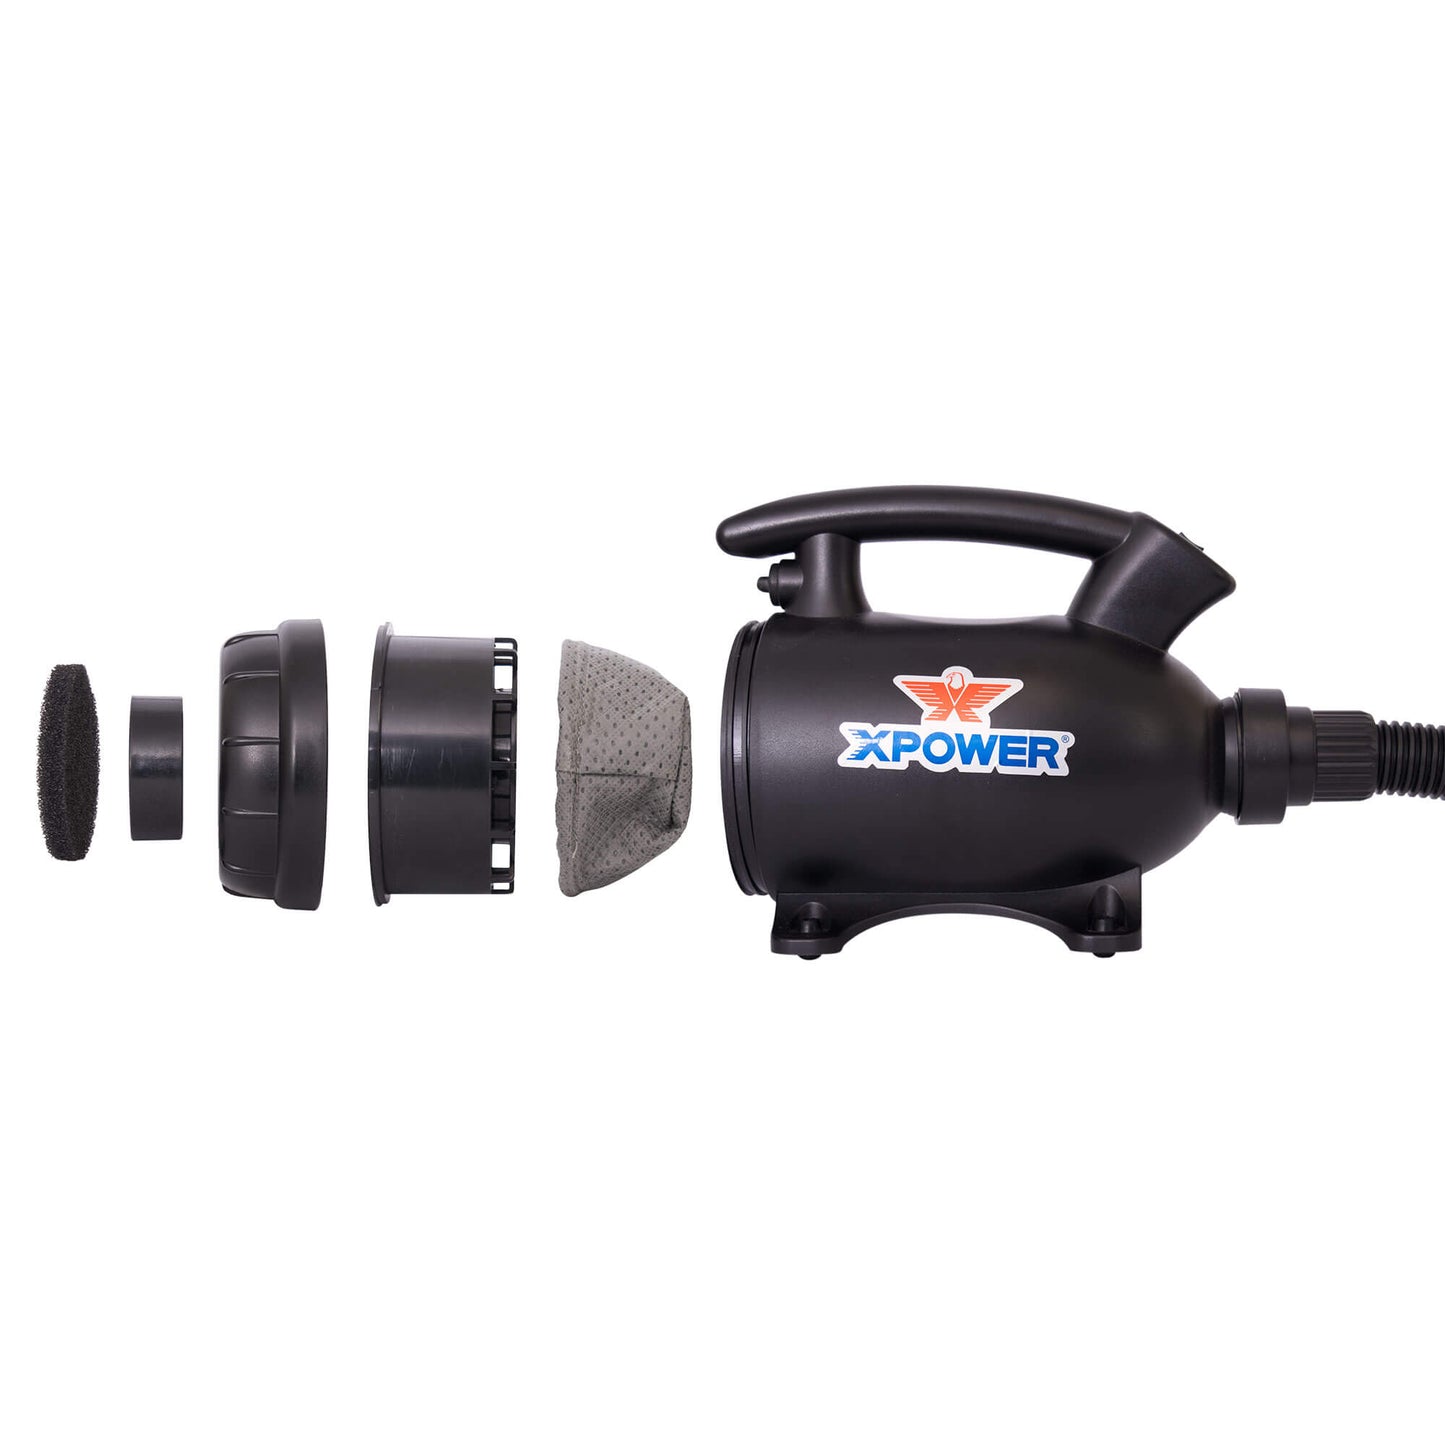 XPower A-5 Multi-Use Powered Air Duster